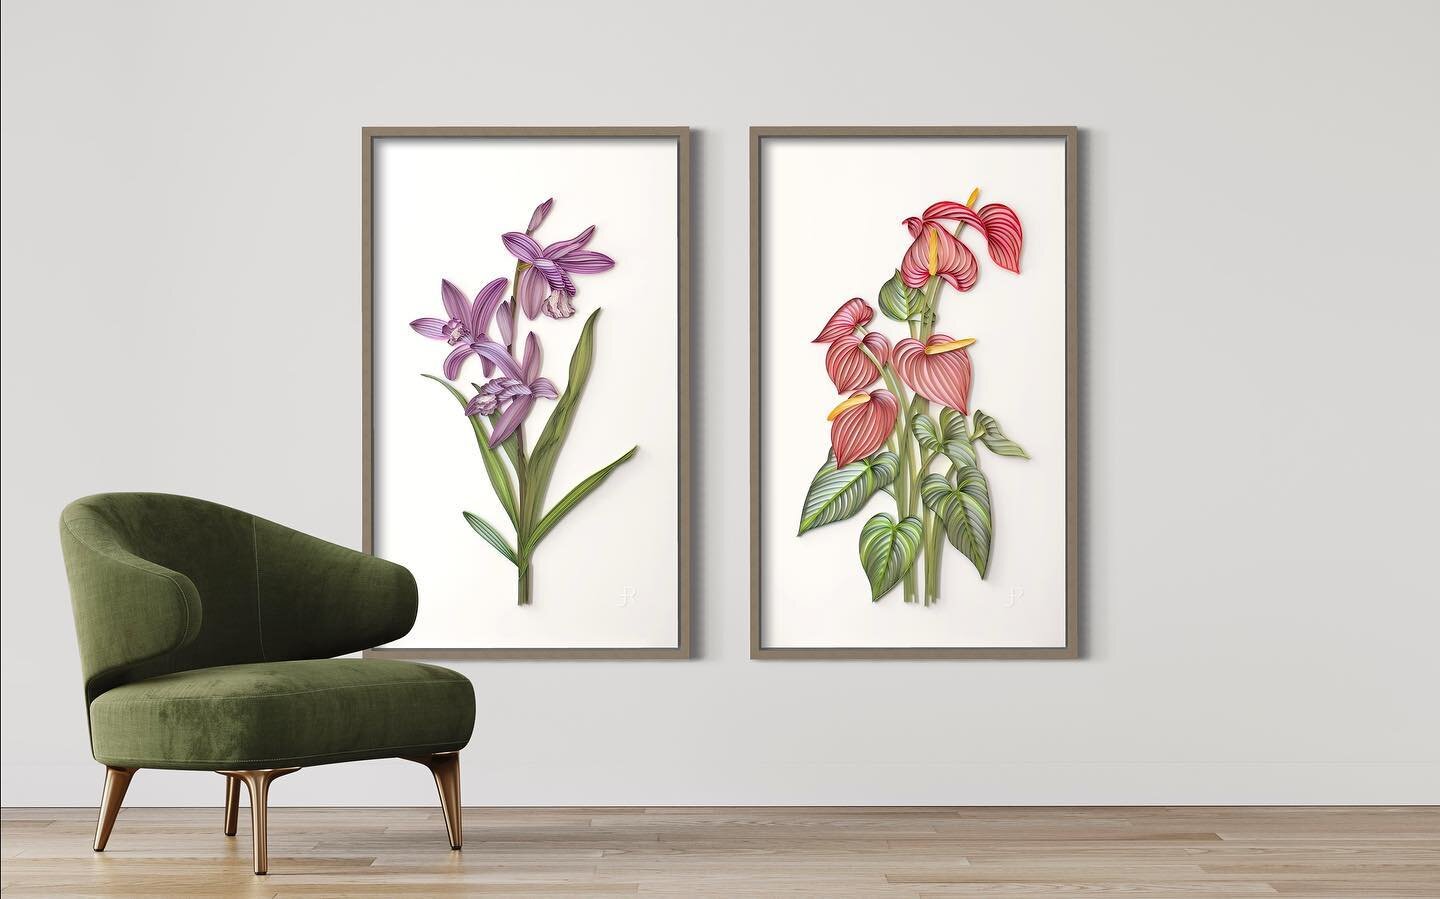 The Chinese Ground Orchid and Anthurium. I love making these larger scale pieces!
Each measures 28&quot; x 47&quot; / 711 x 1194 mm.

#CommissionArt #MadeFromPaper #JUDiTHandROLFE